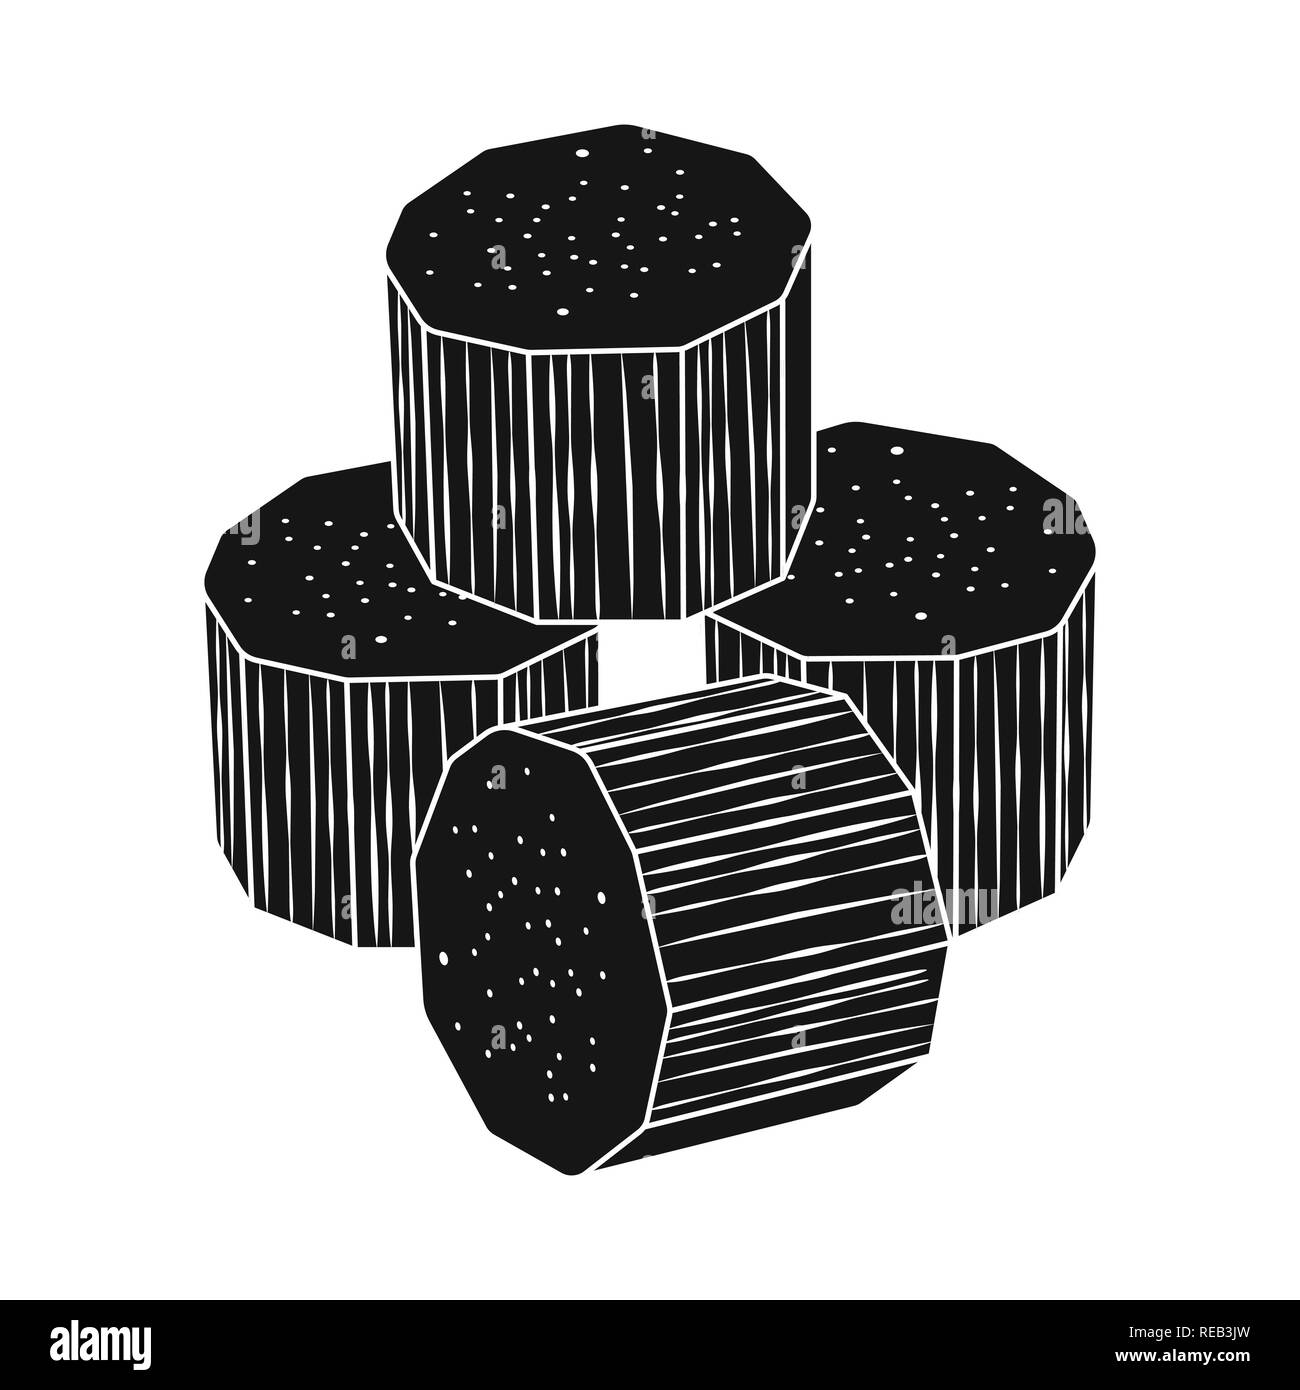 piece,cube,brown,jaggery,block,organic,india,africa,carbohydrate,solid,sugarcane,cane,sugar,field,plant,plantation,farm,agriculture,sucrose,technology,set,vector,icon,illustration,isolated,collection,design,element,graphic,sign,black,simple, Vector Vectors , Stock Vector